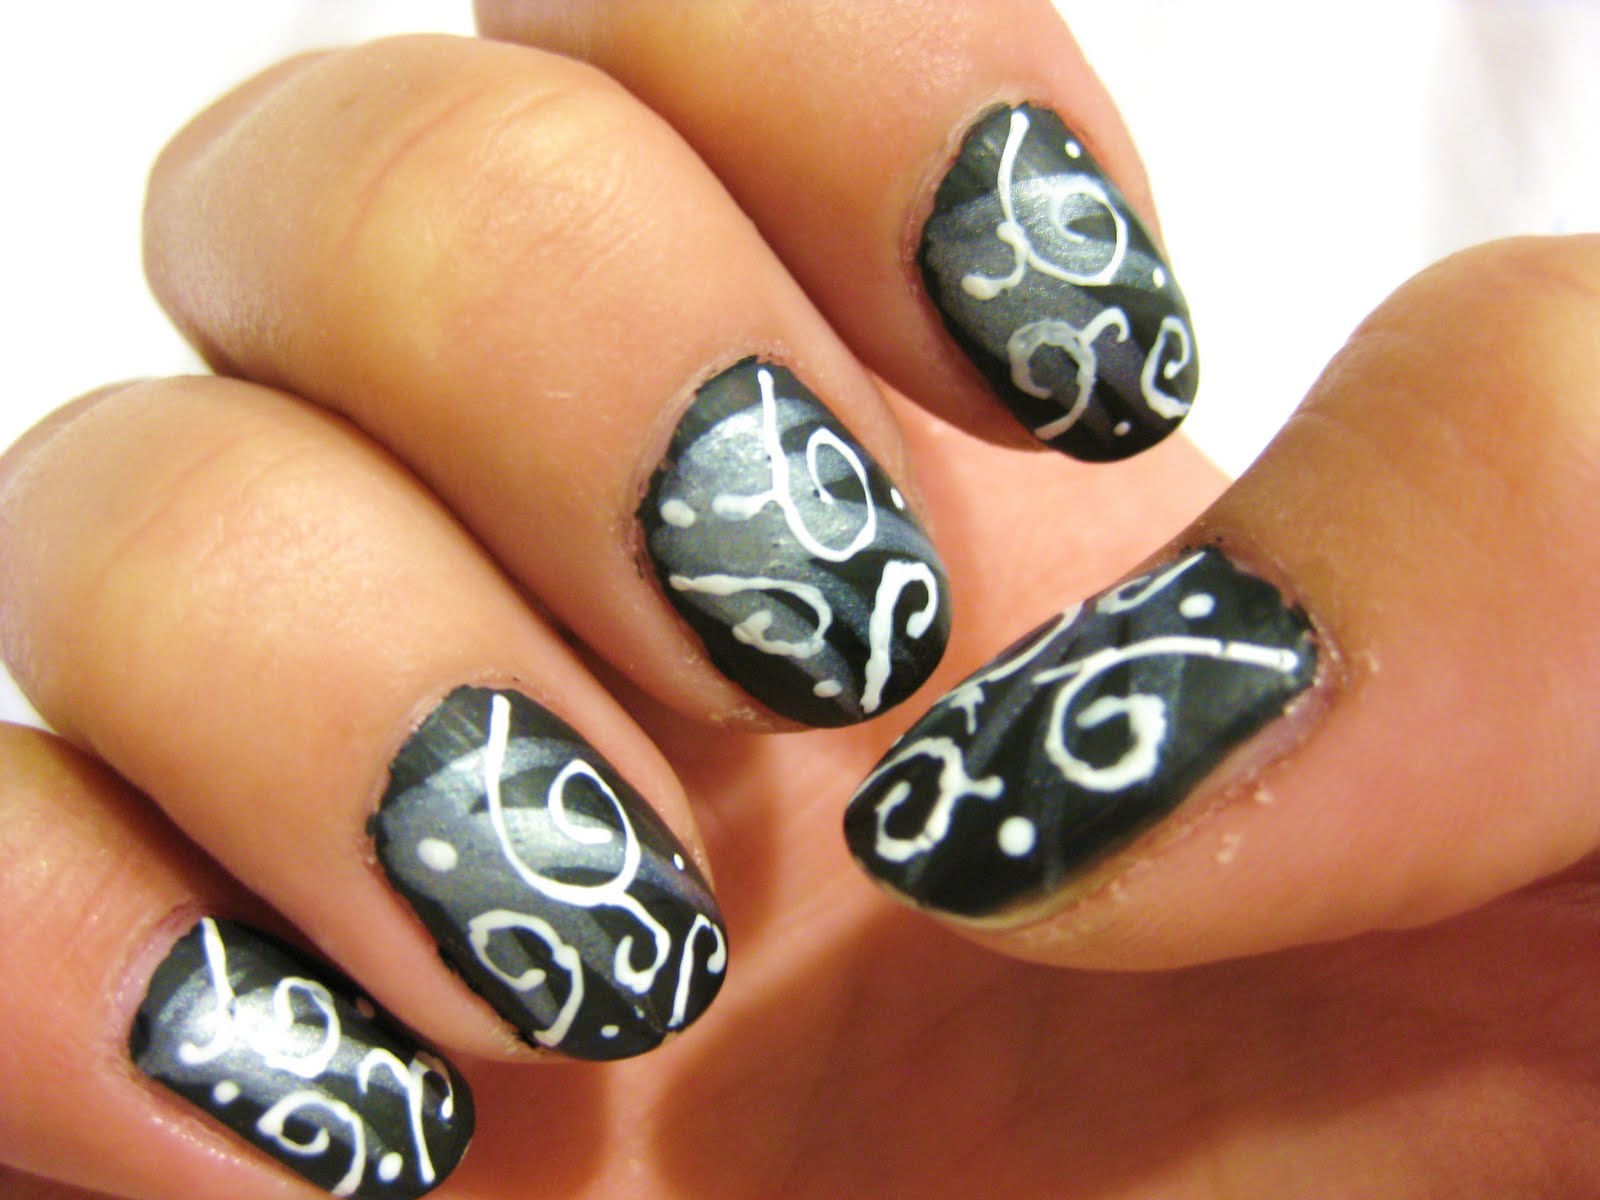 5. Shooting Star Nail Design - wide 5